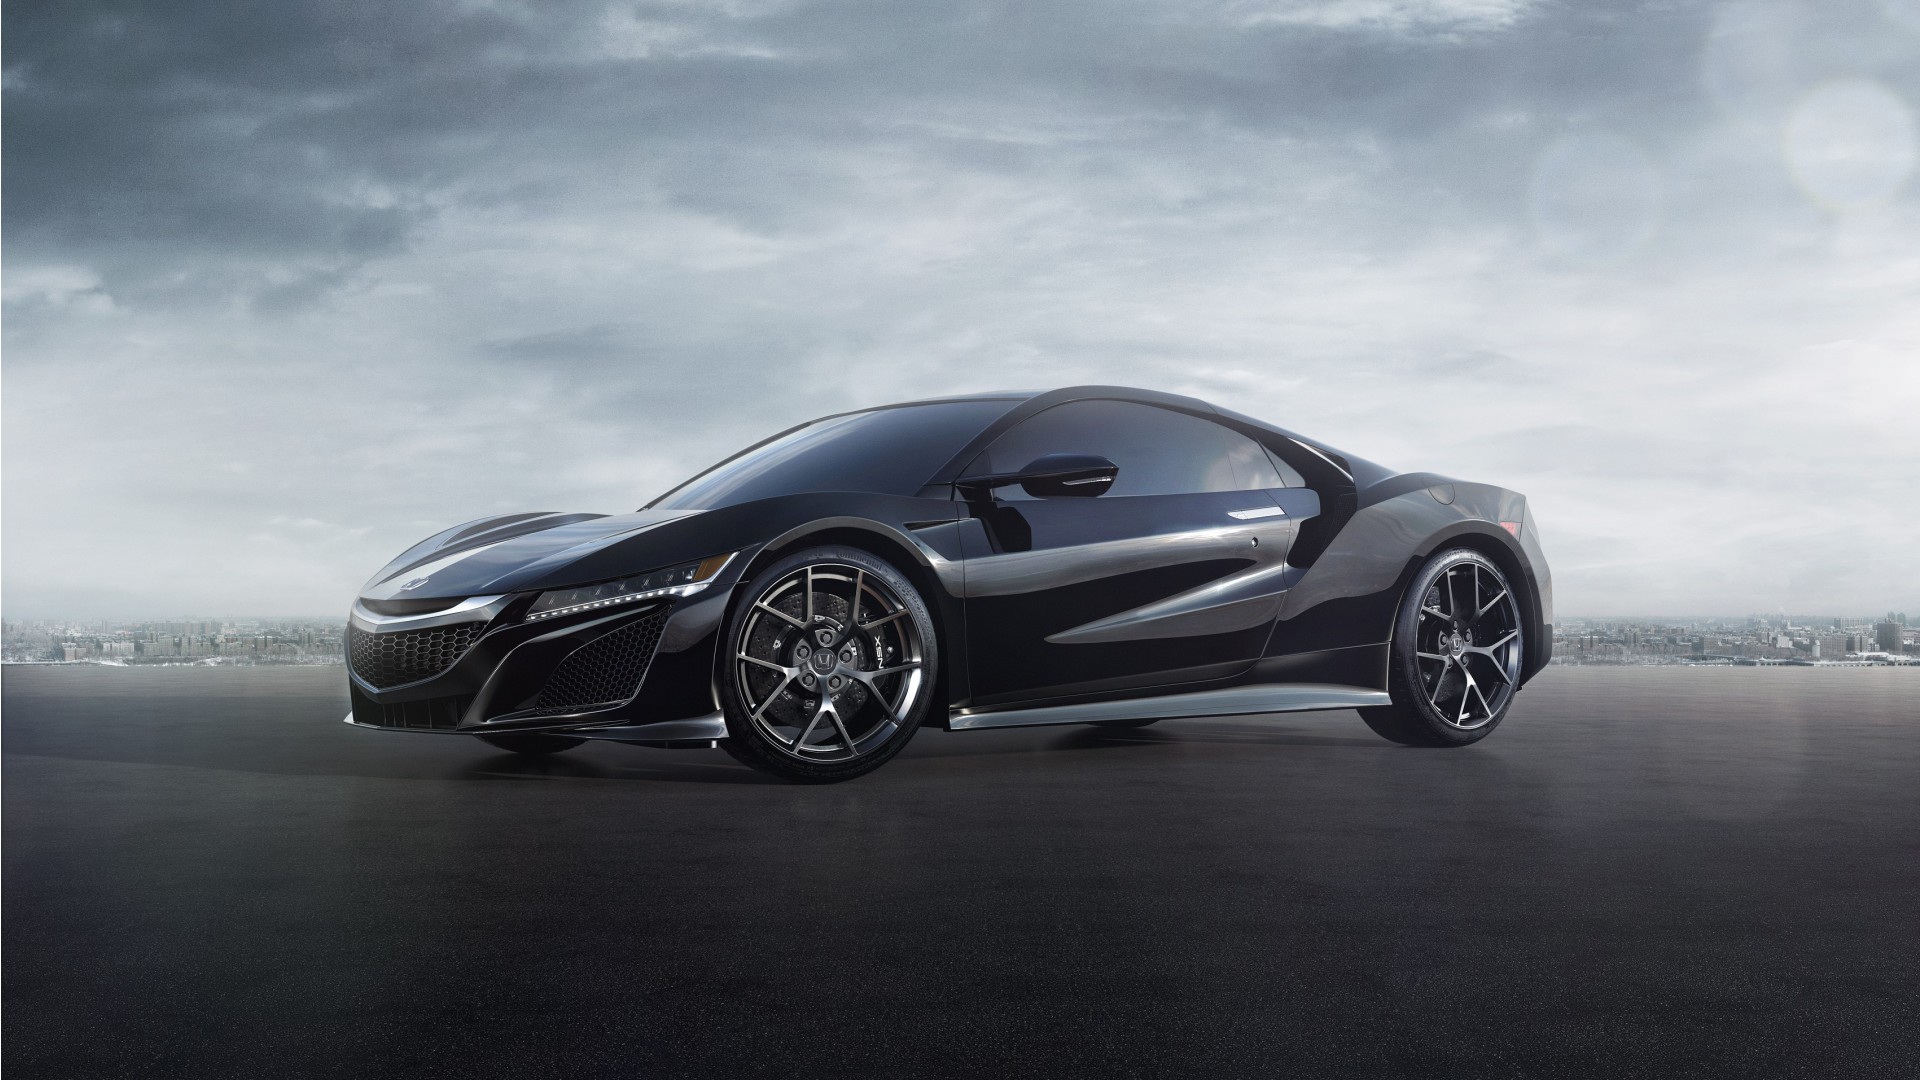 What makes this car so popular for. Honda NSX 2018 Wallpaper | HD Car Wallpapers | ID #9123